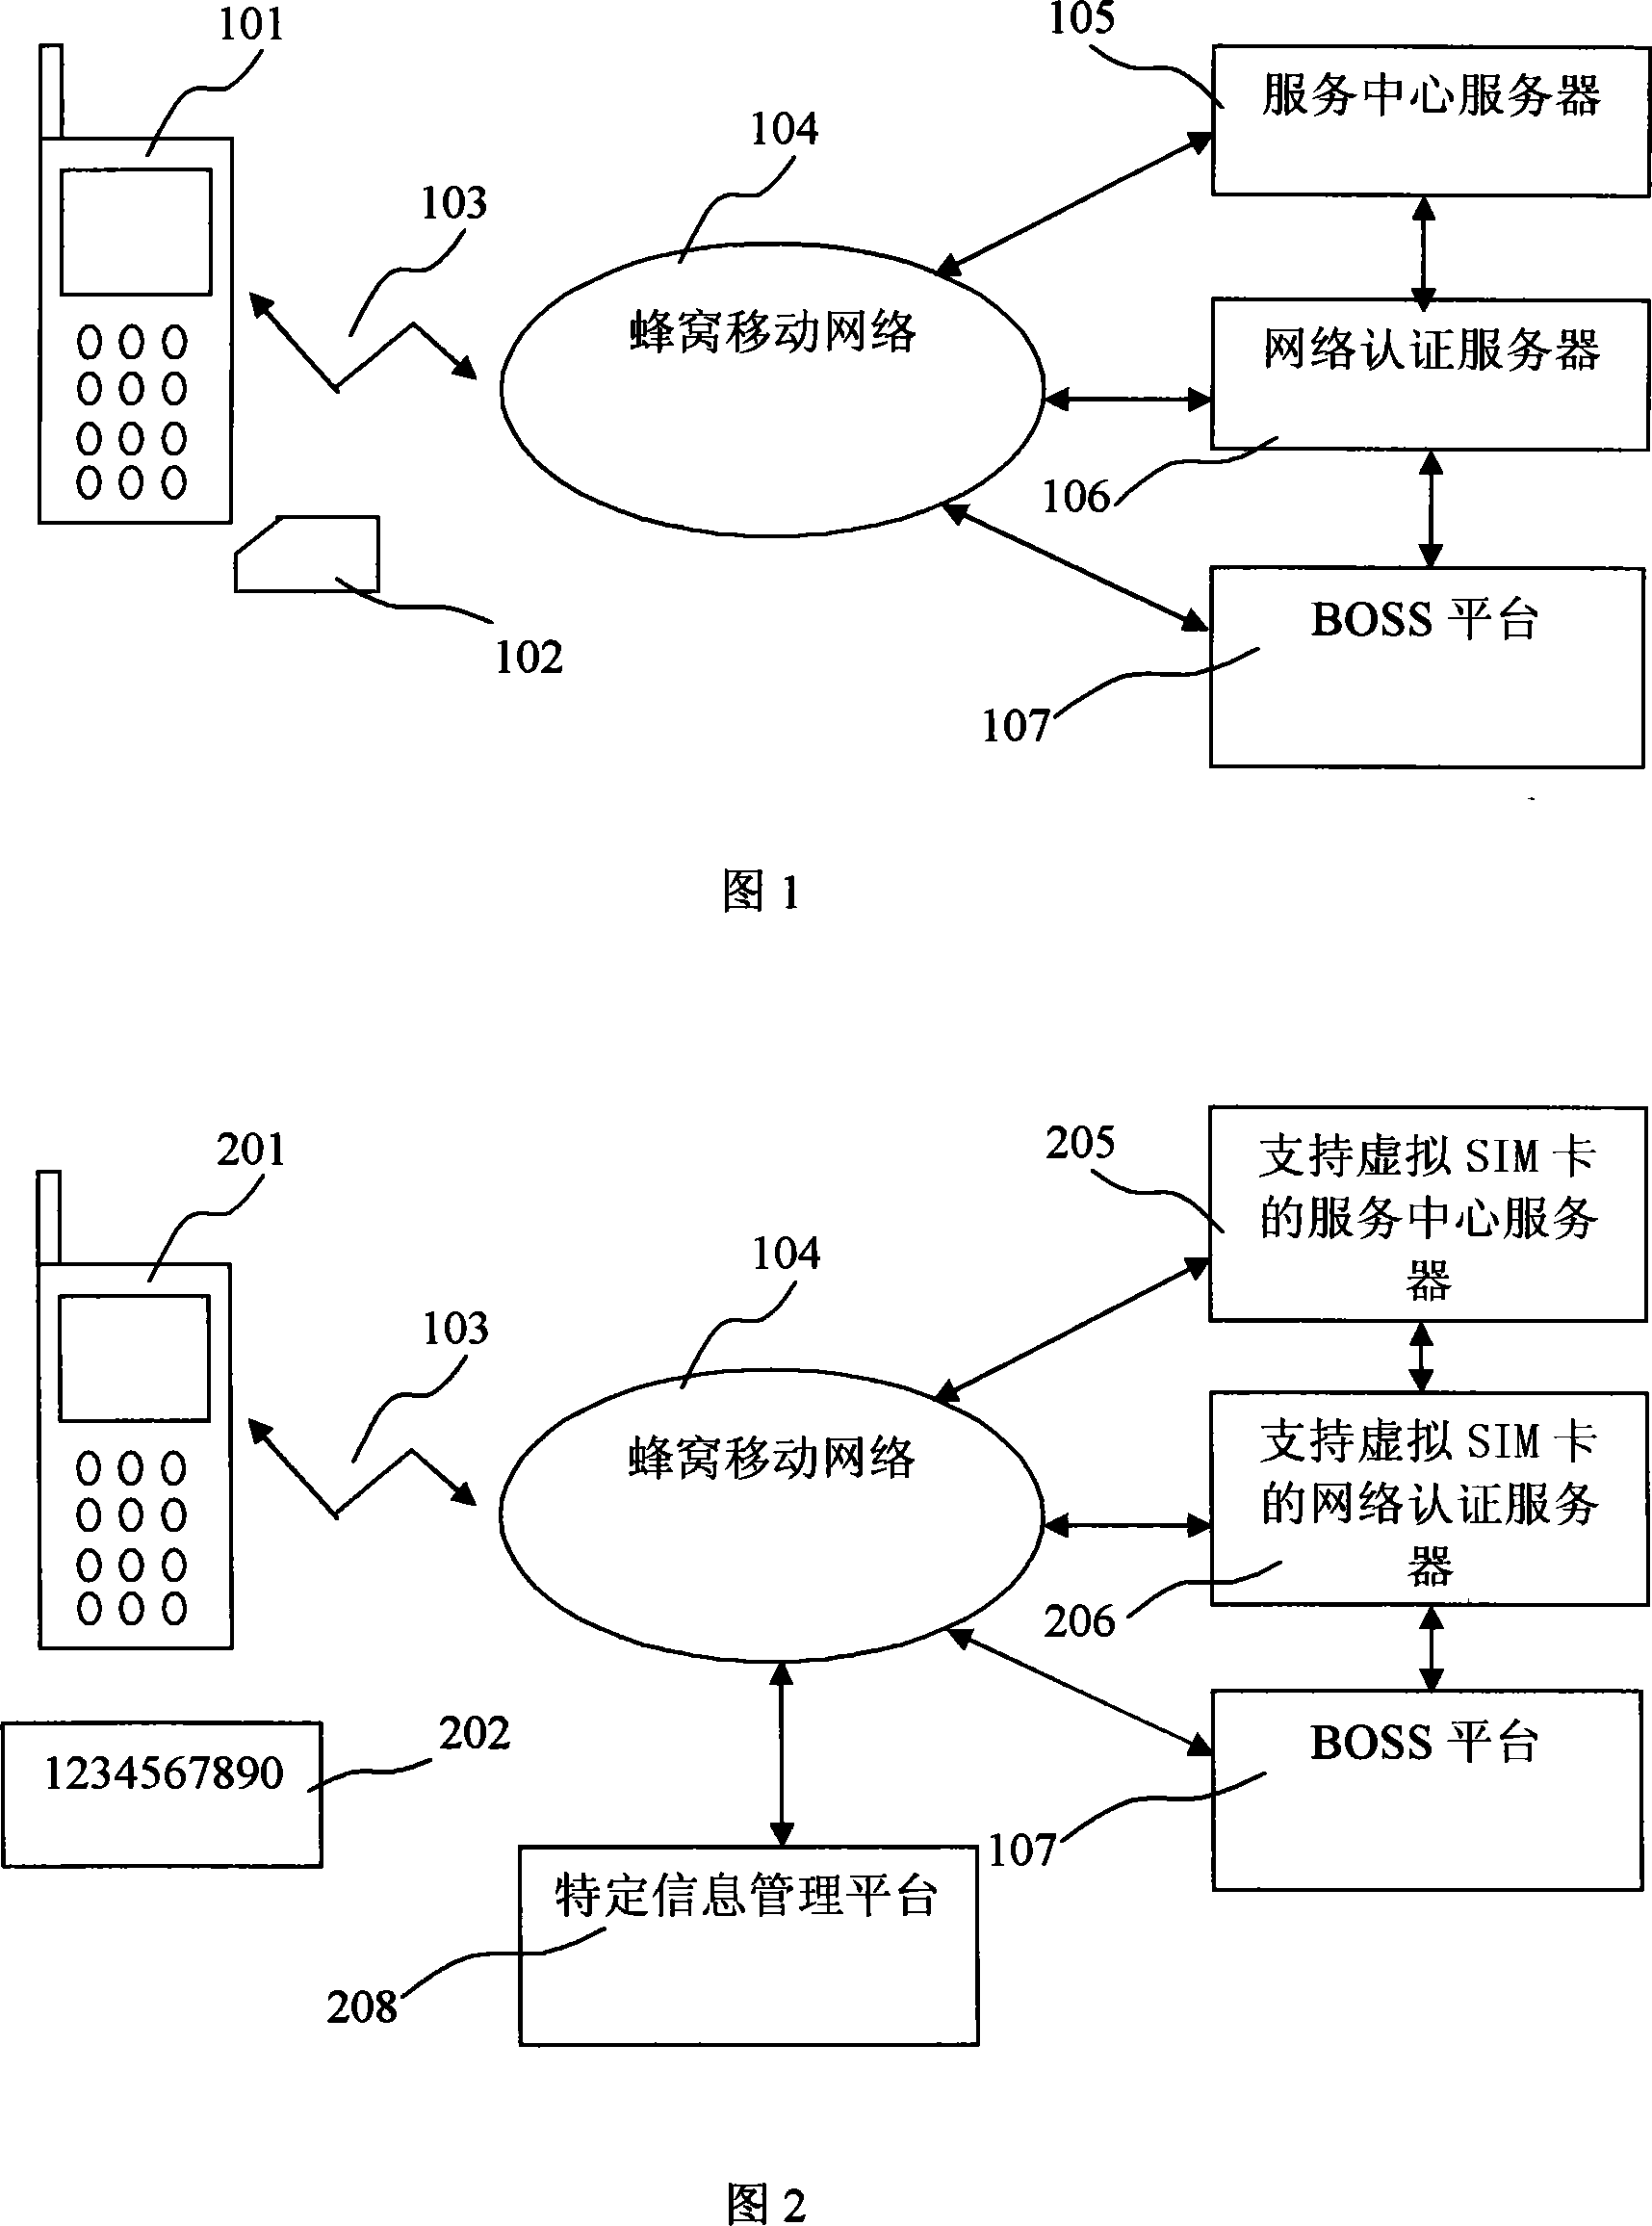 Mobile terminal supporting virtual SIM card and its user identity authentication method